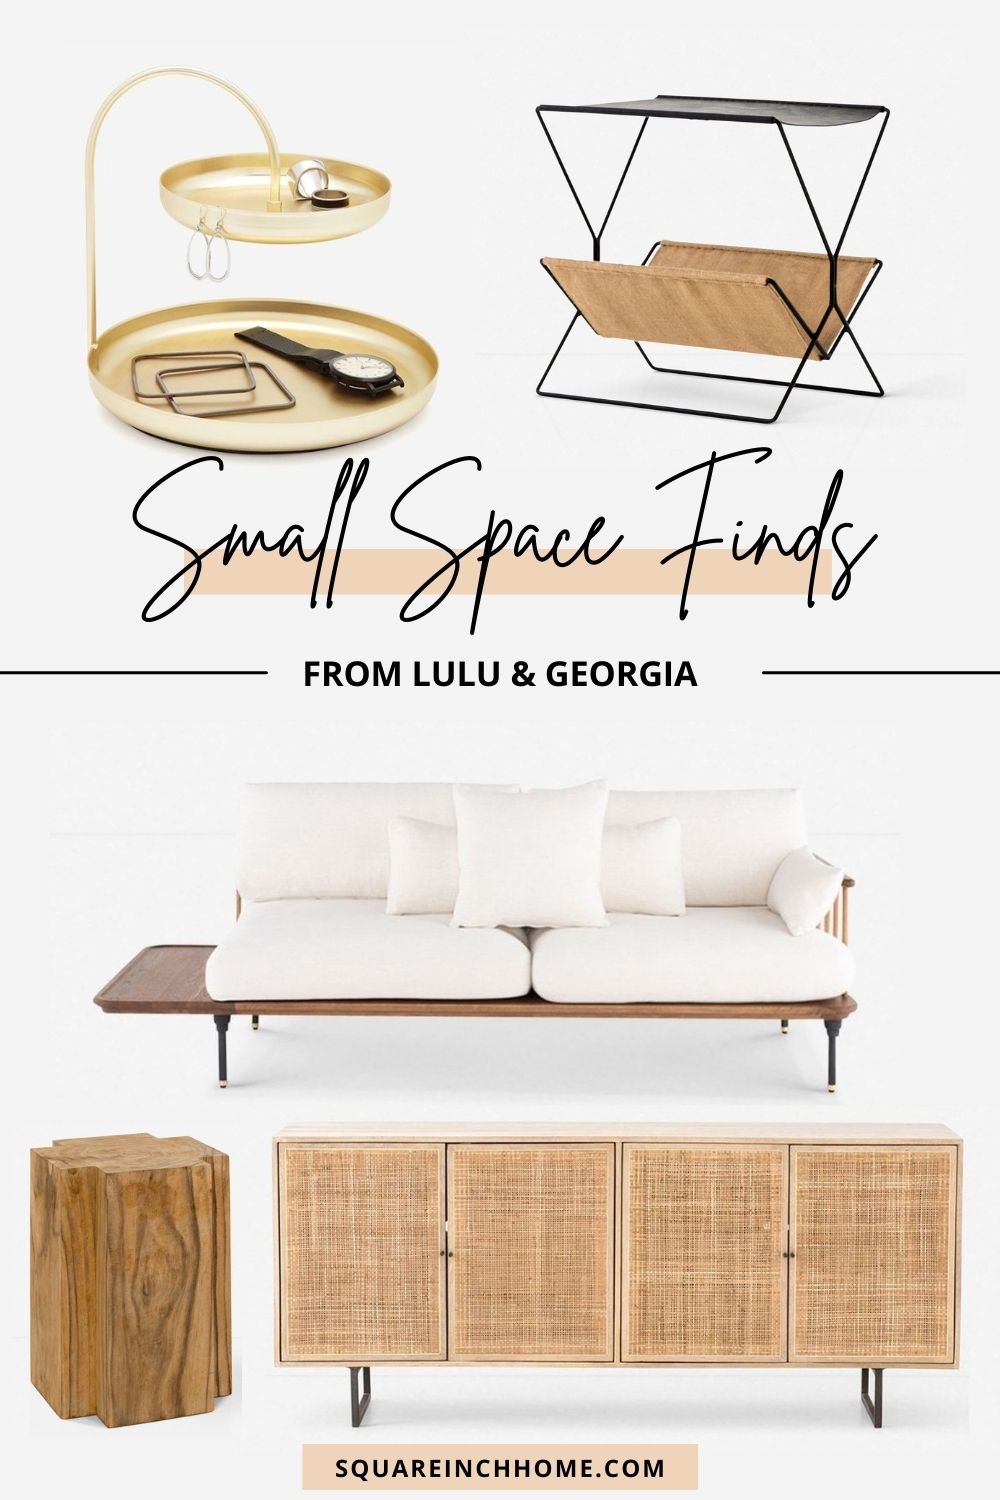 furniture for small spaces from lulu & georgia